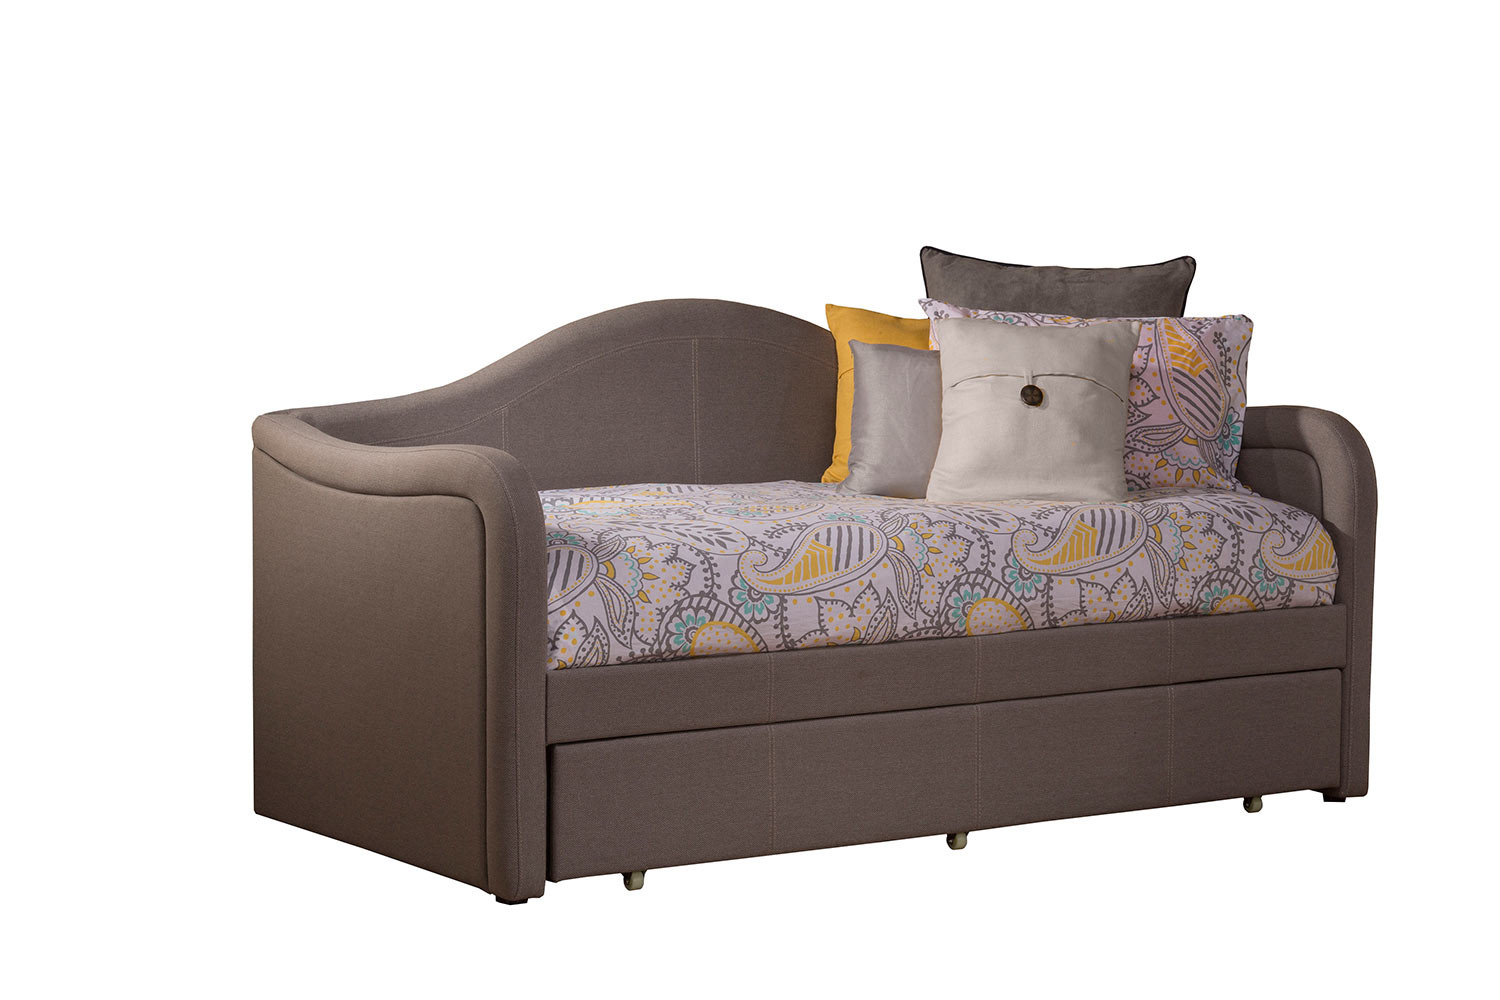 Hillsdale Porter Daybed with Trundle Unit